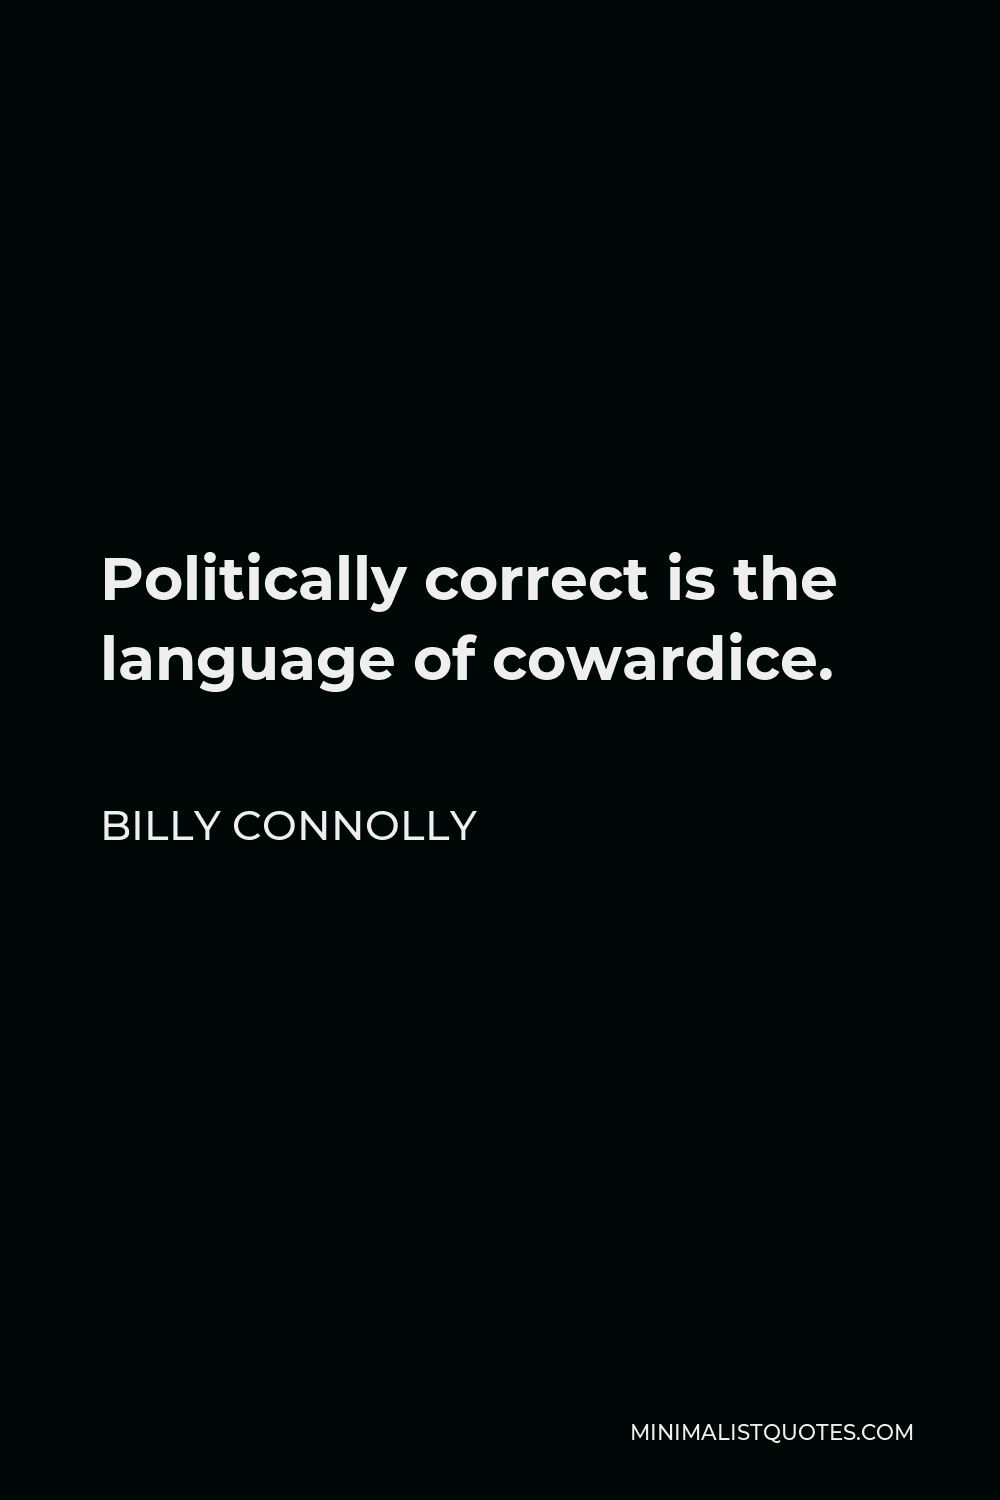 Billy Connolly Quote - Politically correct is the language of cowardice.